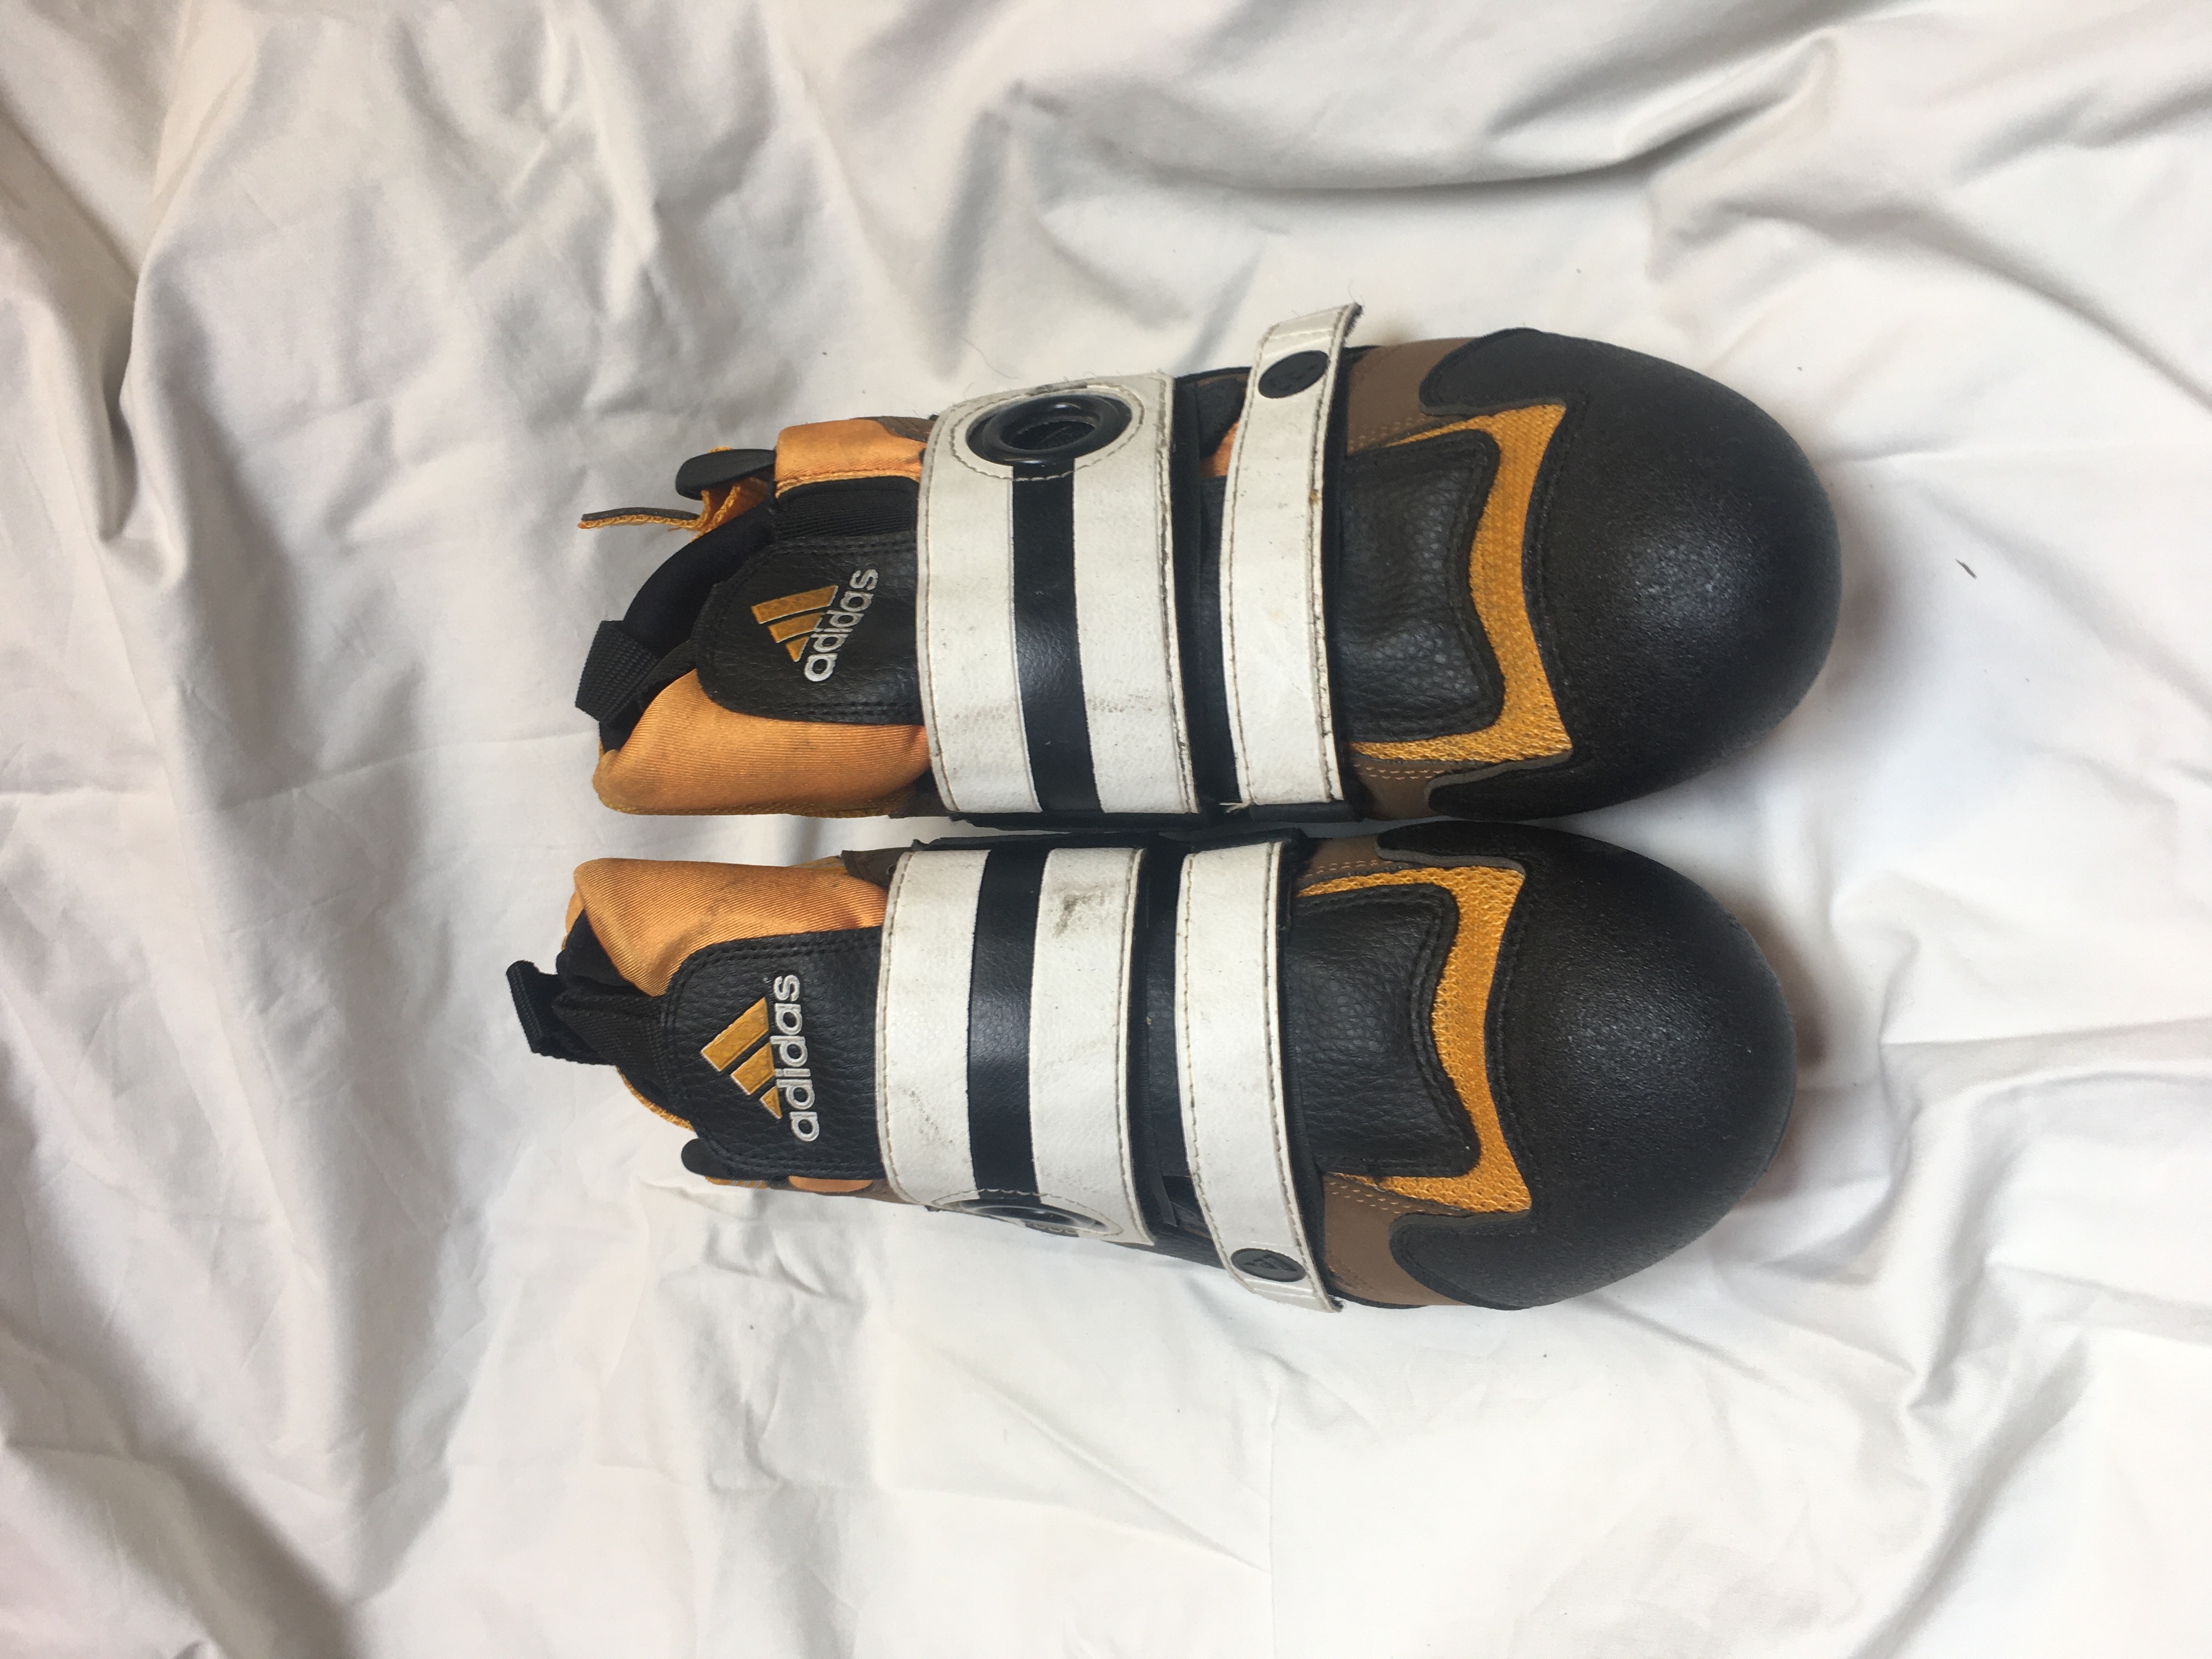 used cycling shoes for sale